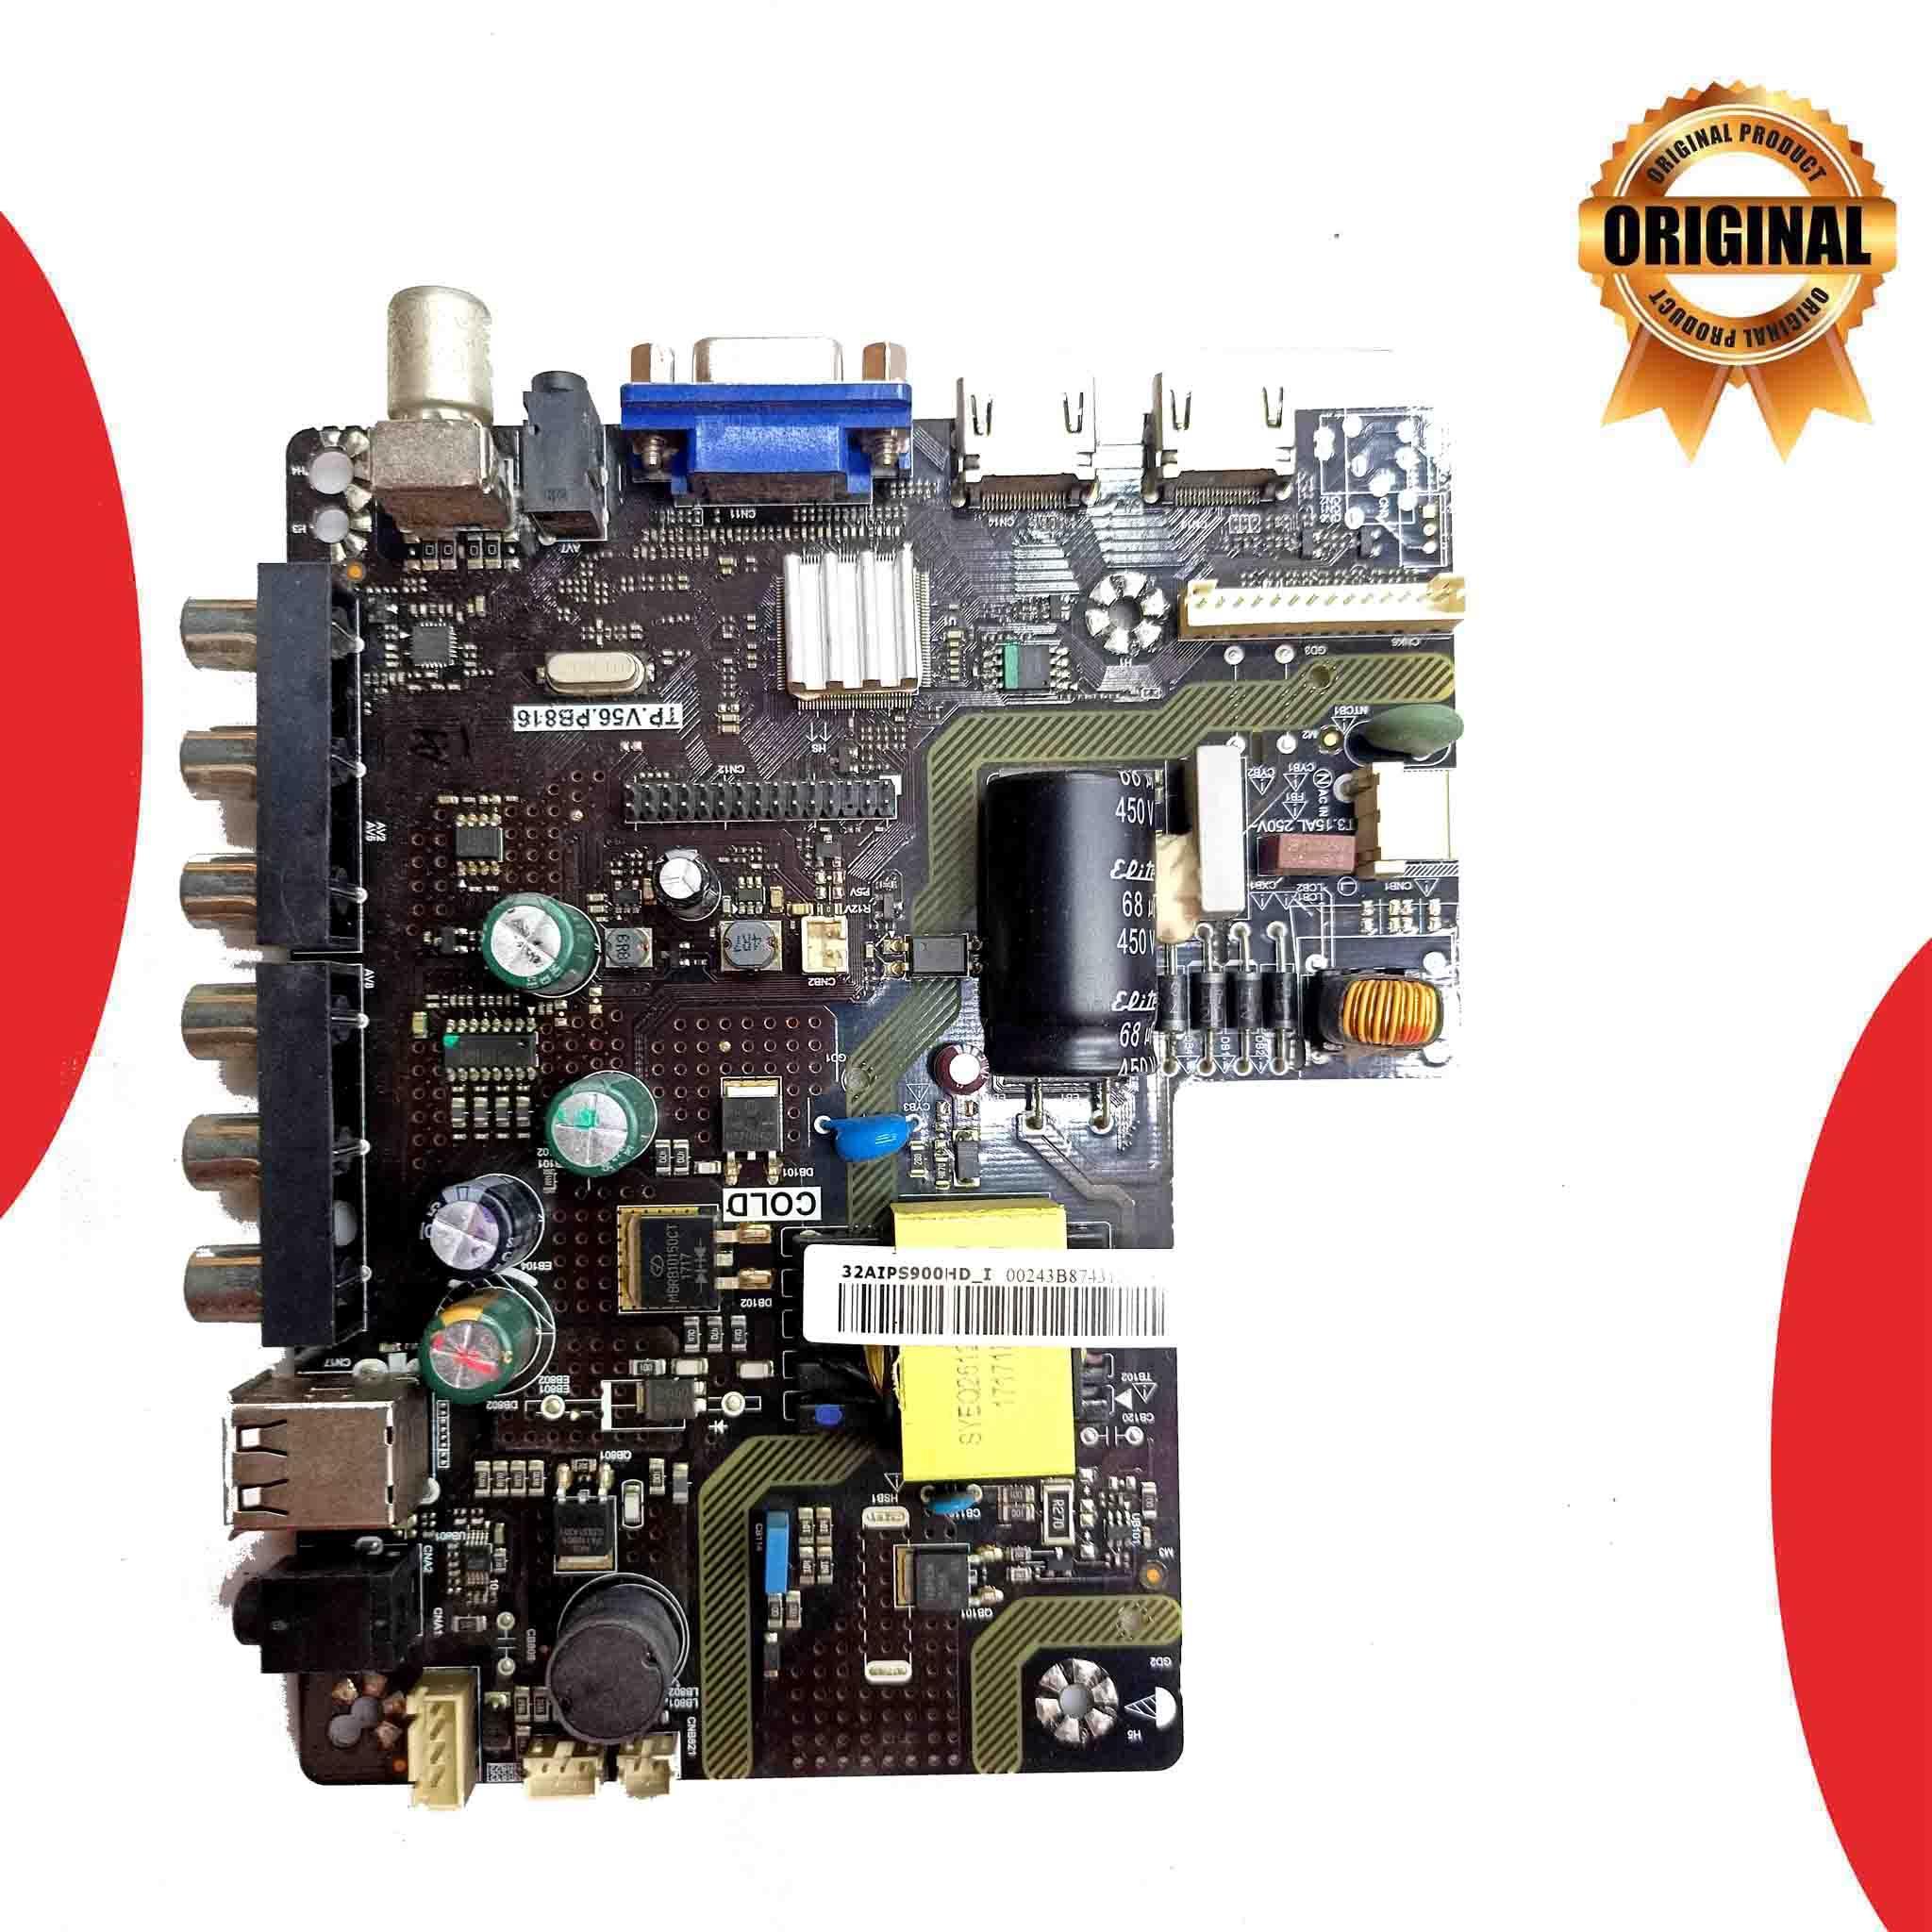 Model 32AIPS900HD Micromax LED TV Motherboard - Great Bharat Electronics